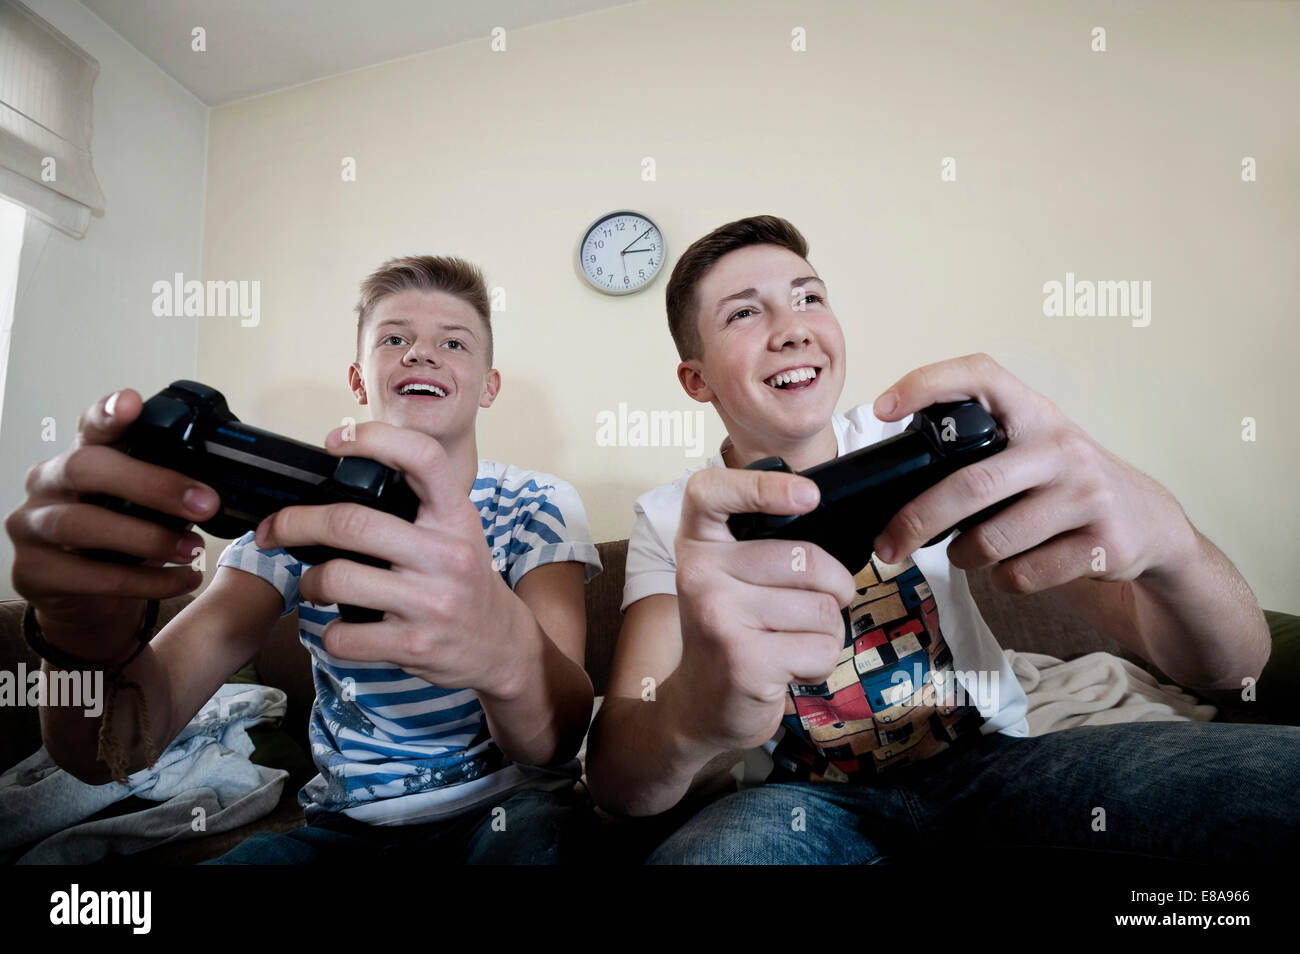 Excited multiethnic teen friends enjoying video games, free time at home, Stock image